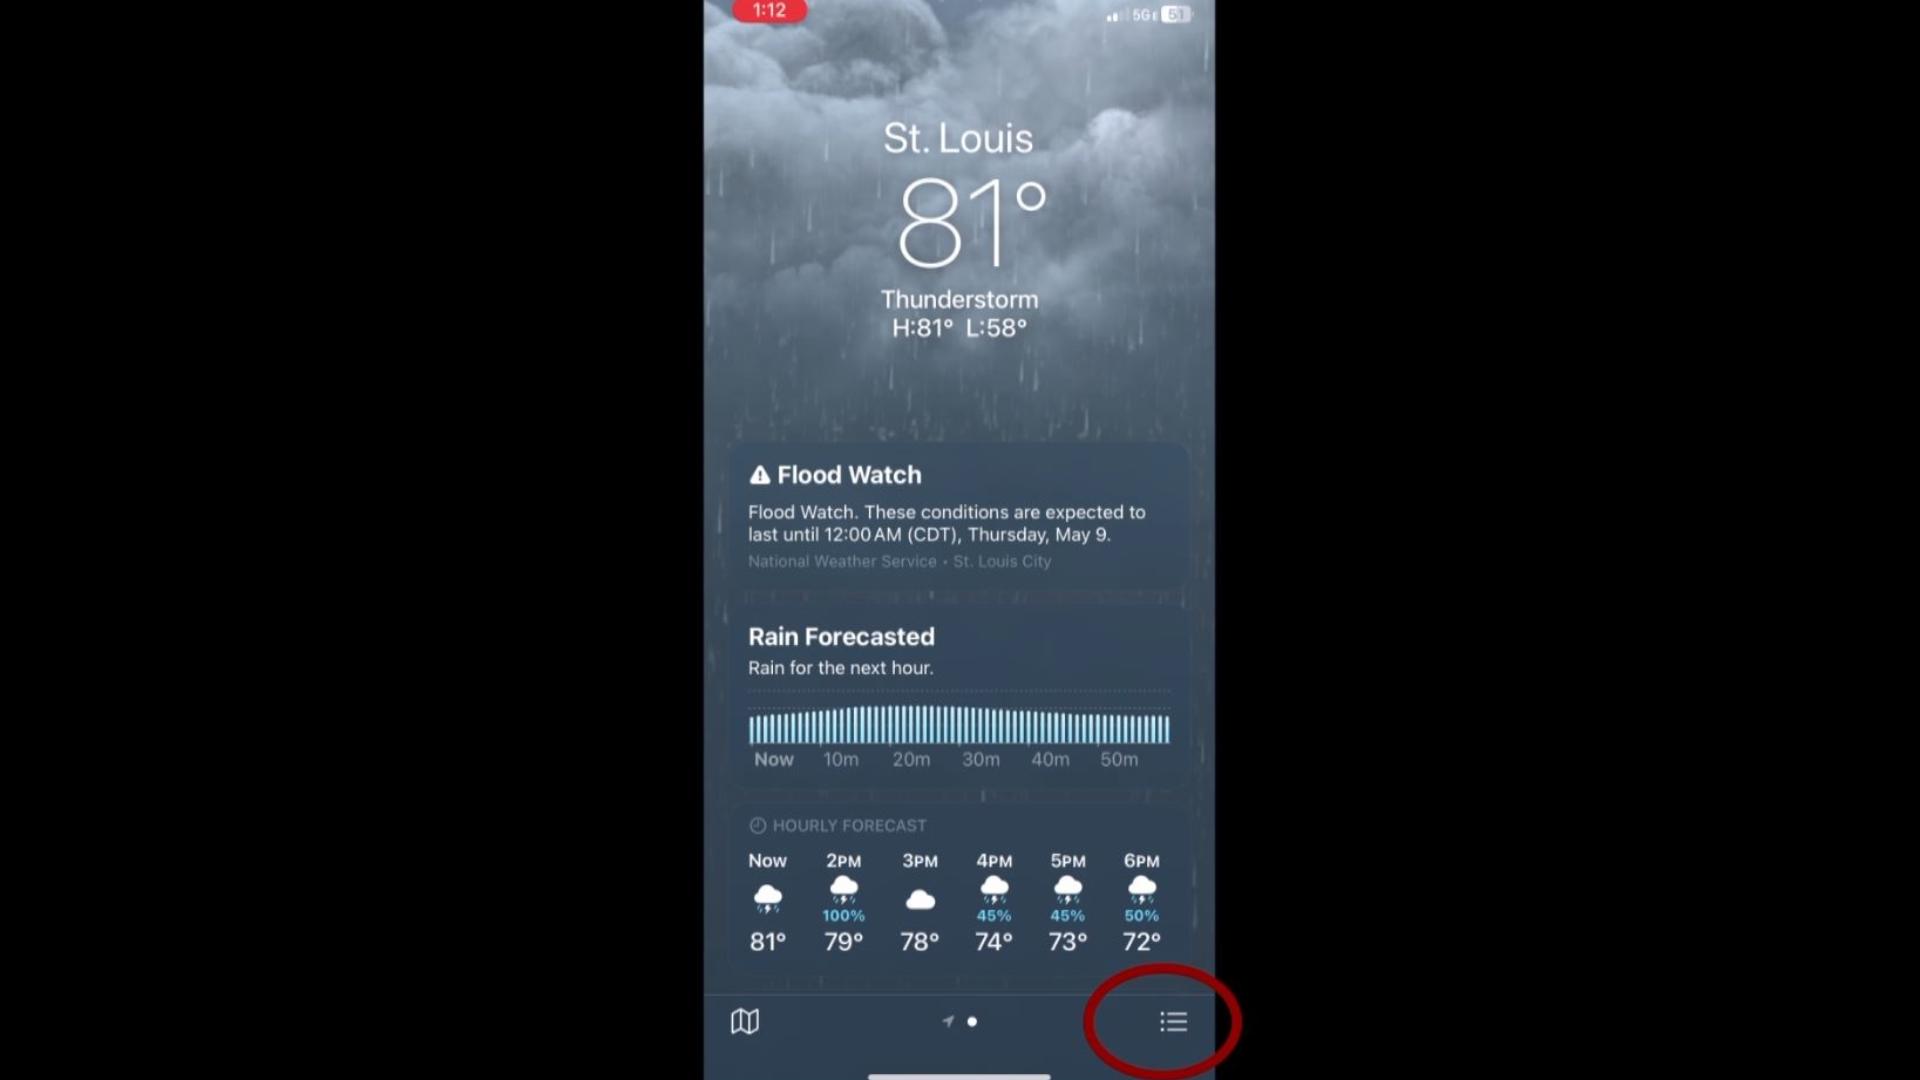 How to activate weather alerts on iPhone